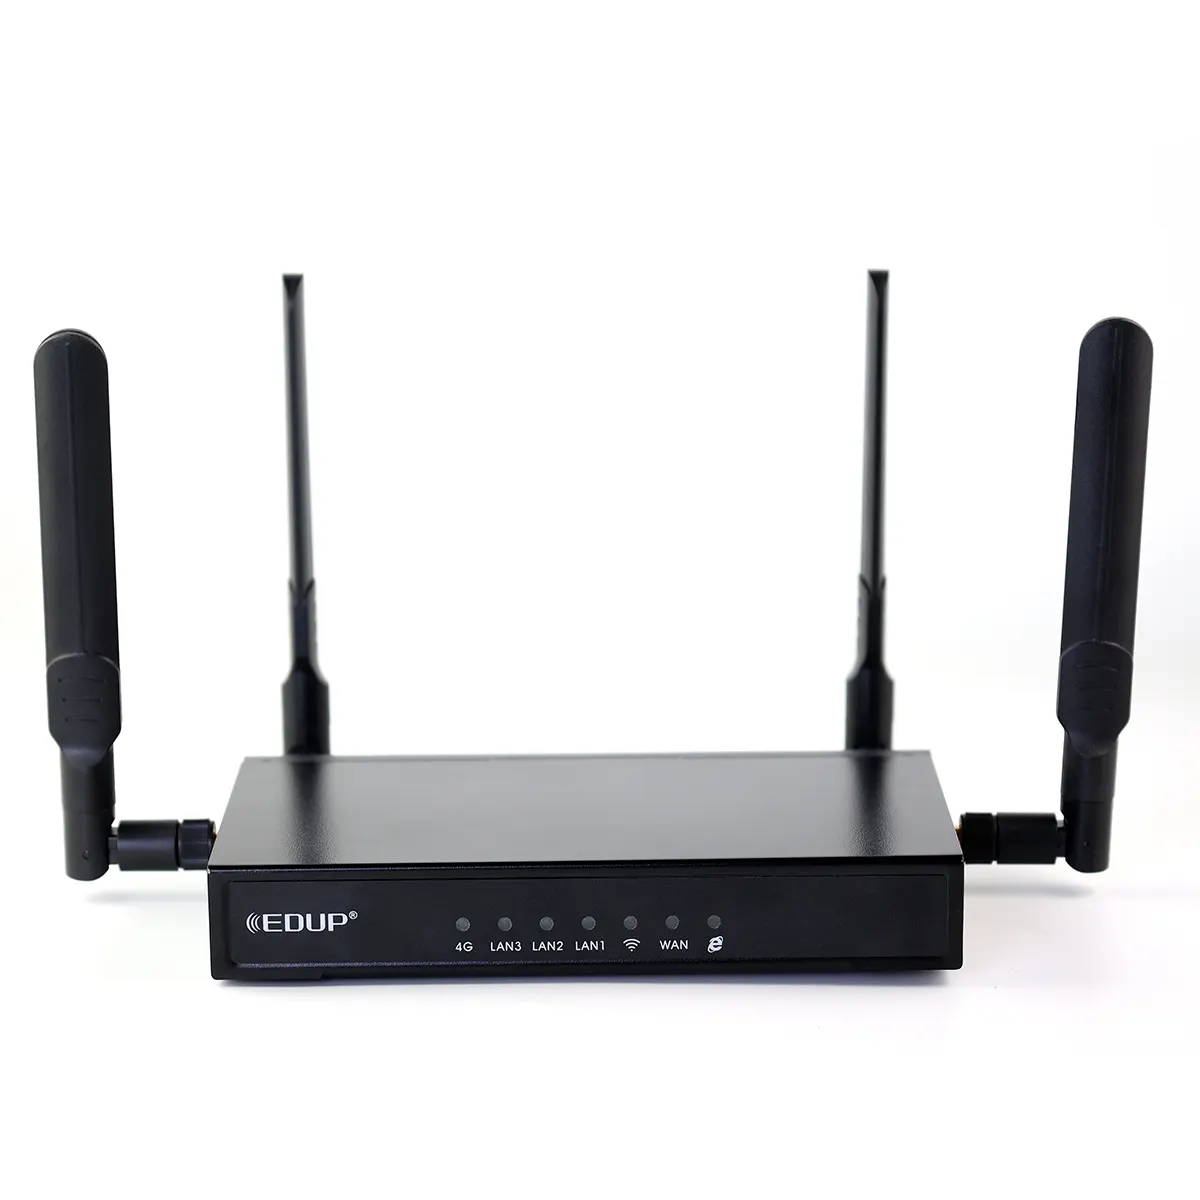 EDUP Wifi Router Wireless 4G CPE 300Mbps With Dual SIM Slot 4 antennas 5dBi high gain 802.11n Industrial router